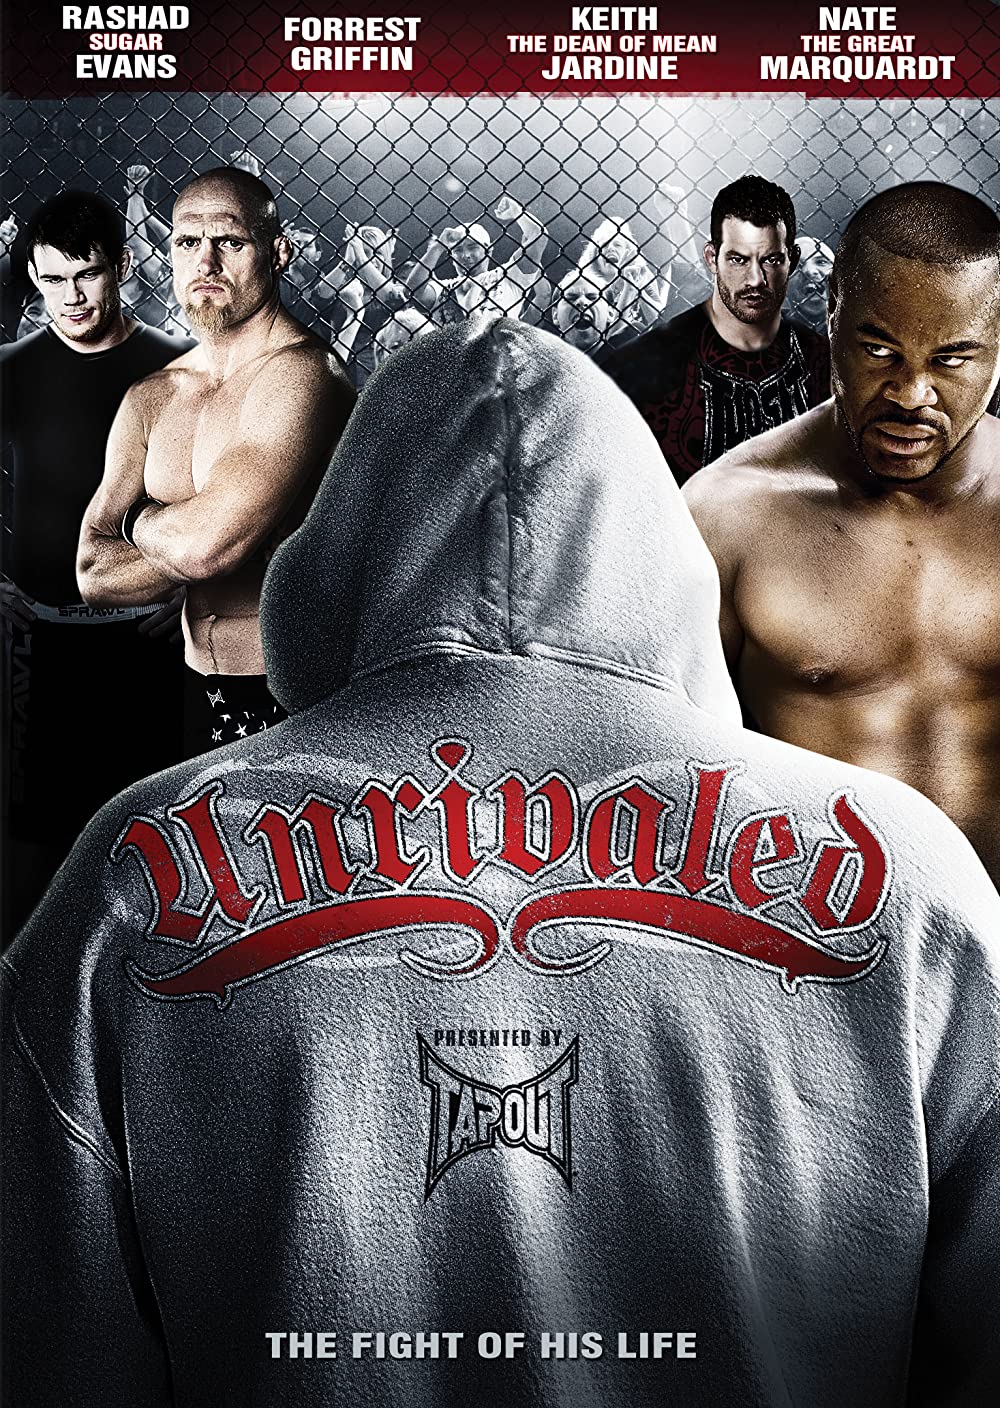 Unrivaled - King Of The Cage (2010) 